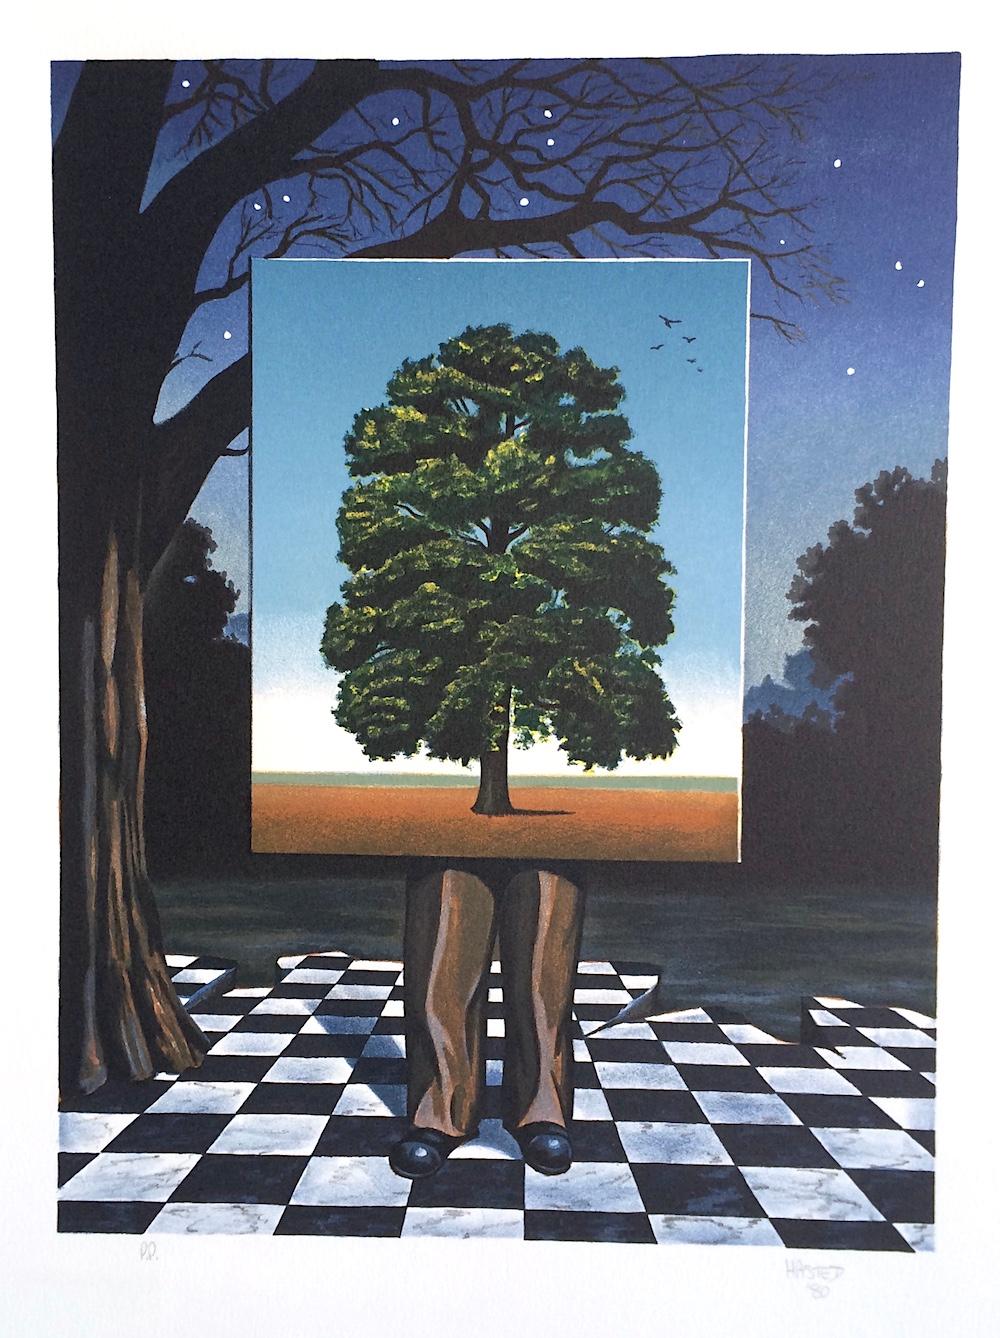 Michael Hasted Interior Print -  PUBLIC OUTCRY Signed Lithograph, Surrealist Scene Man, Tree, Checkered Tiles